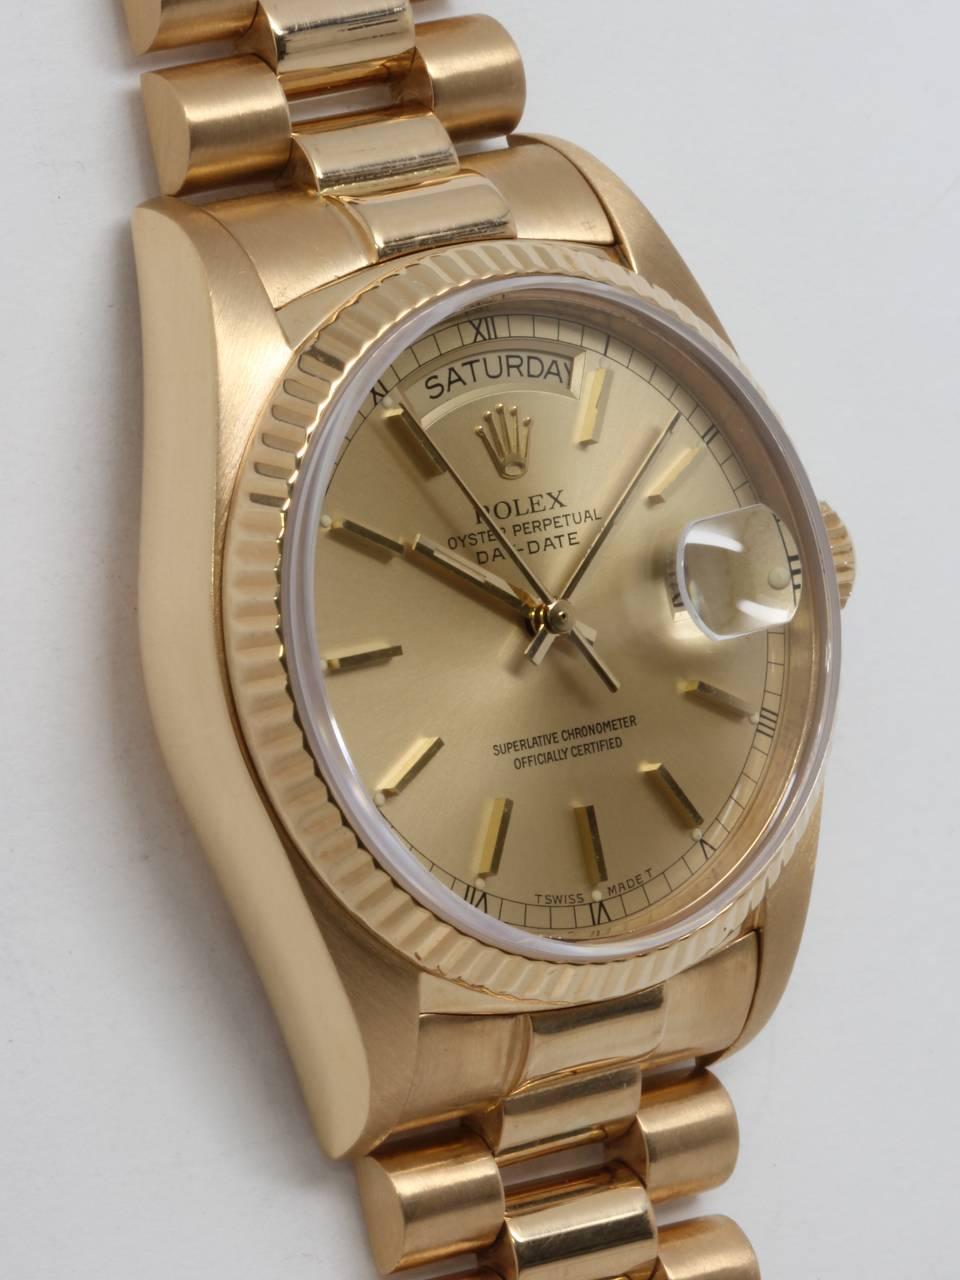 Rolex 18K Yellow Gold Day Date Wristwatch ref 18038 serial # 8.8 million circa 1986. 36mm diameter case with fluted bezel and sapphire crystal. Classic original champagne dial with applied gold indexes and hands. Powered by calibre 3155 self winding